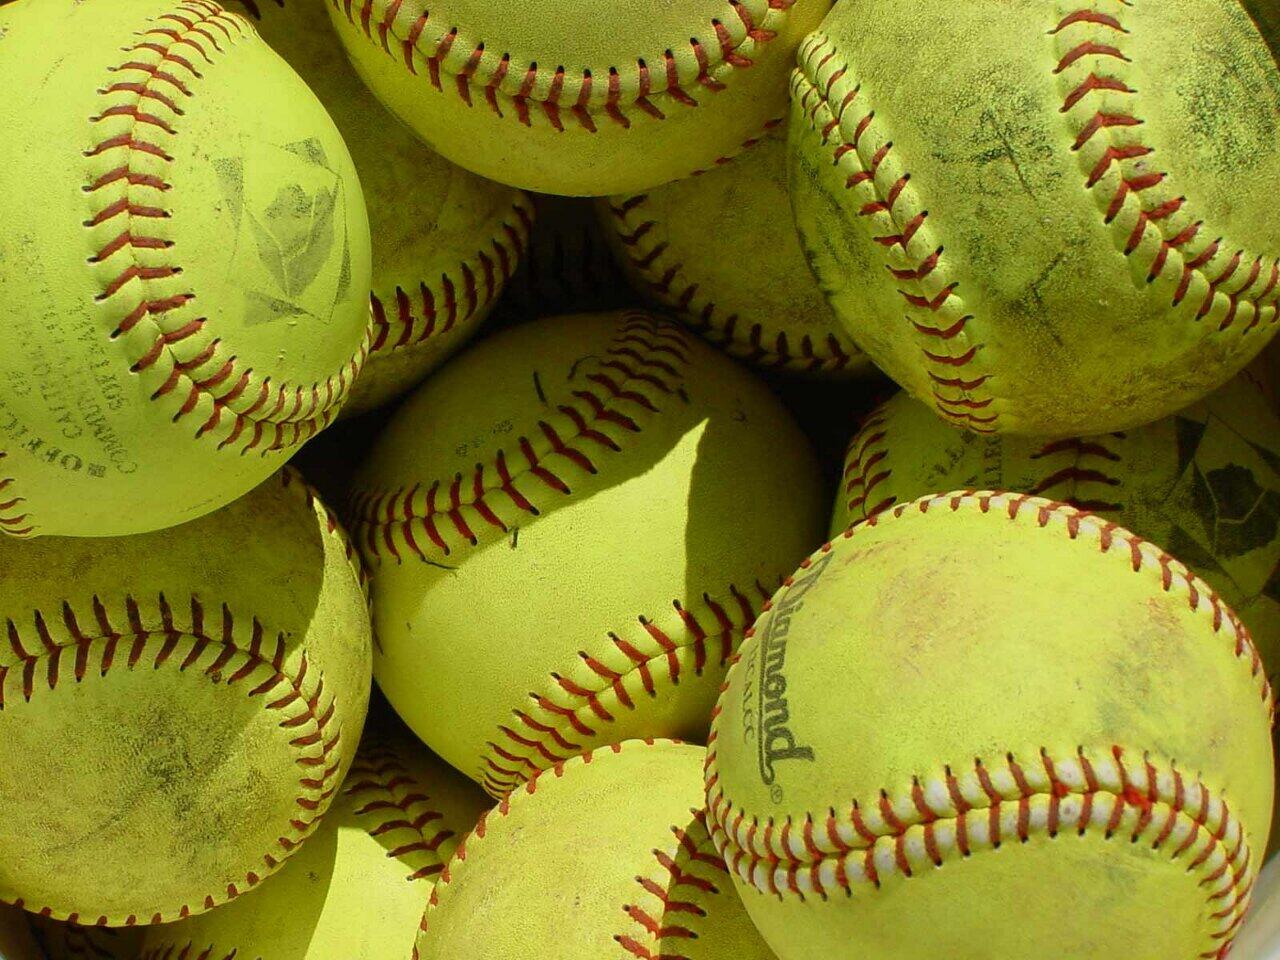 softball quotes and sayings for girls